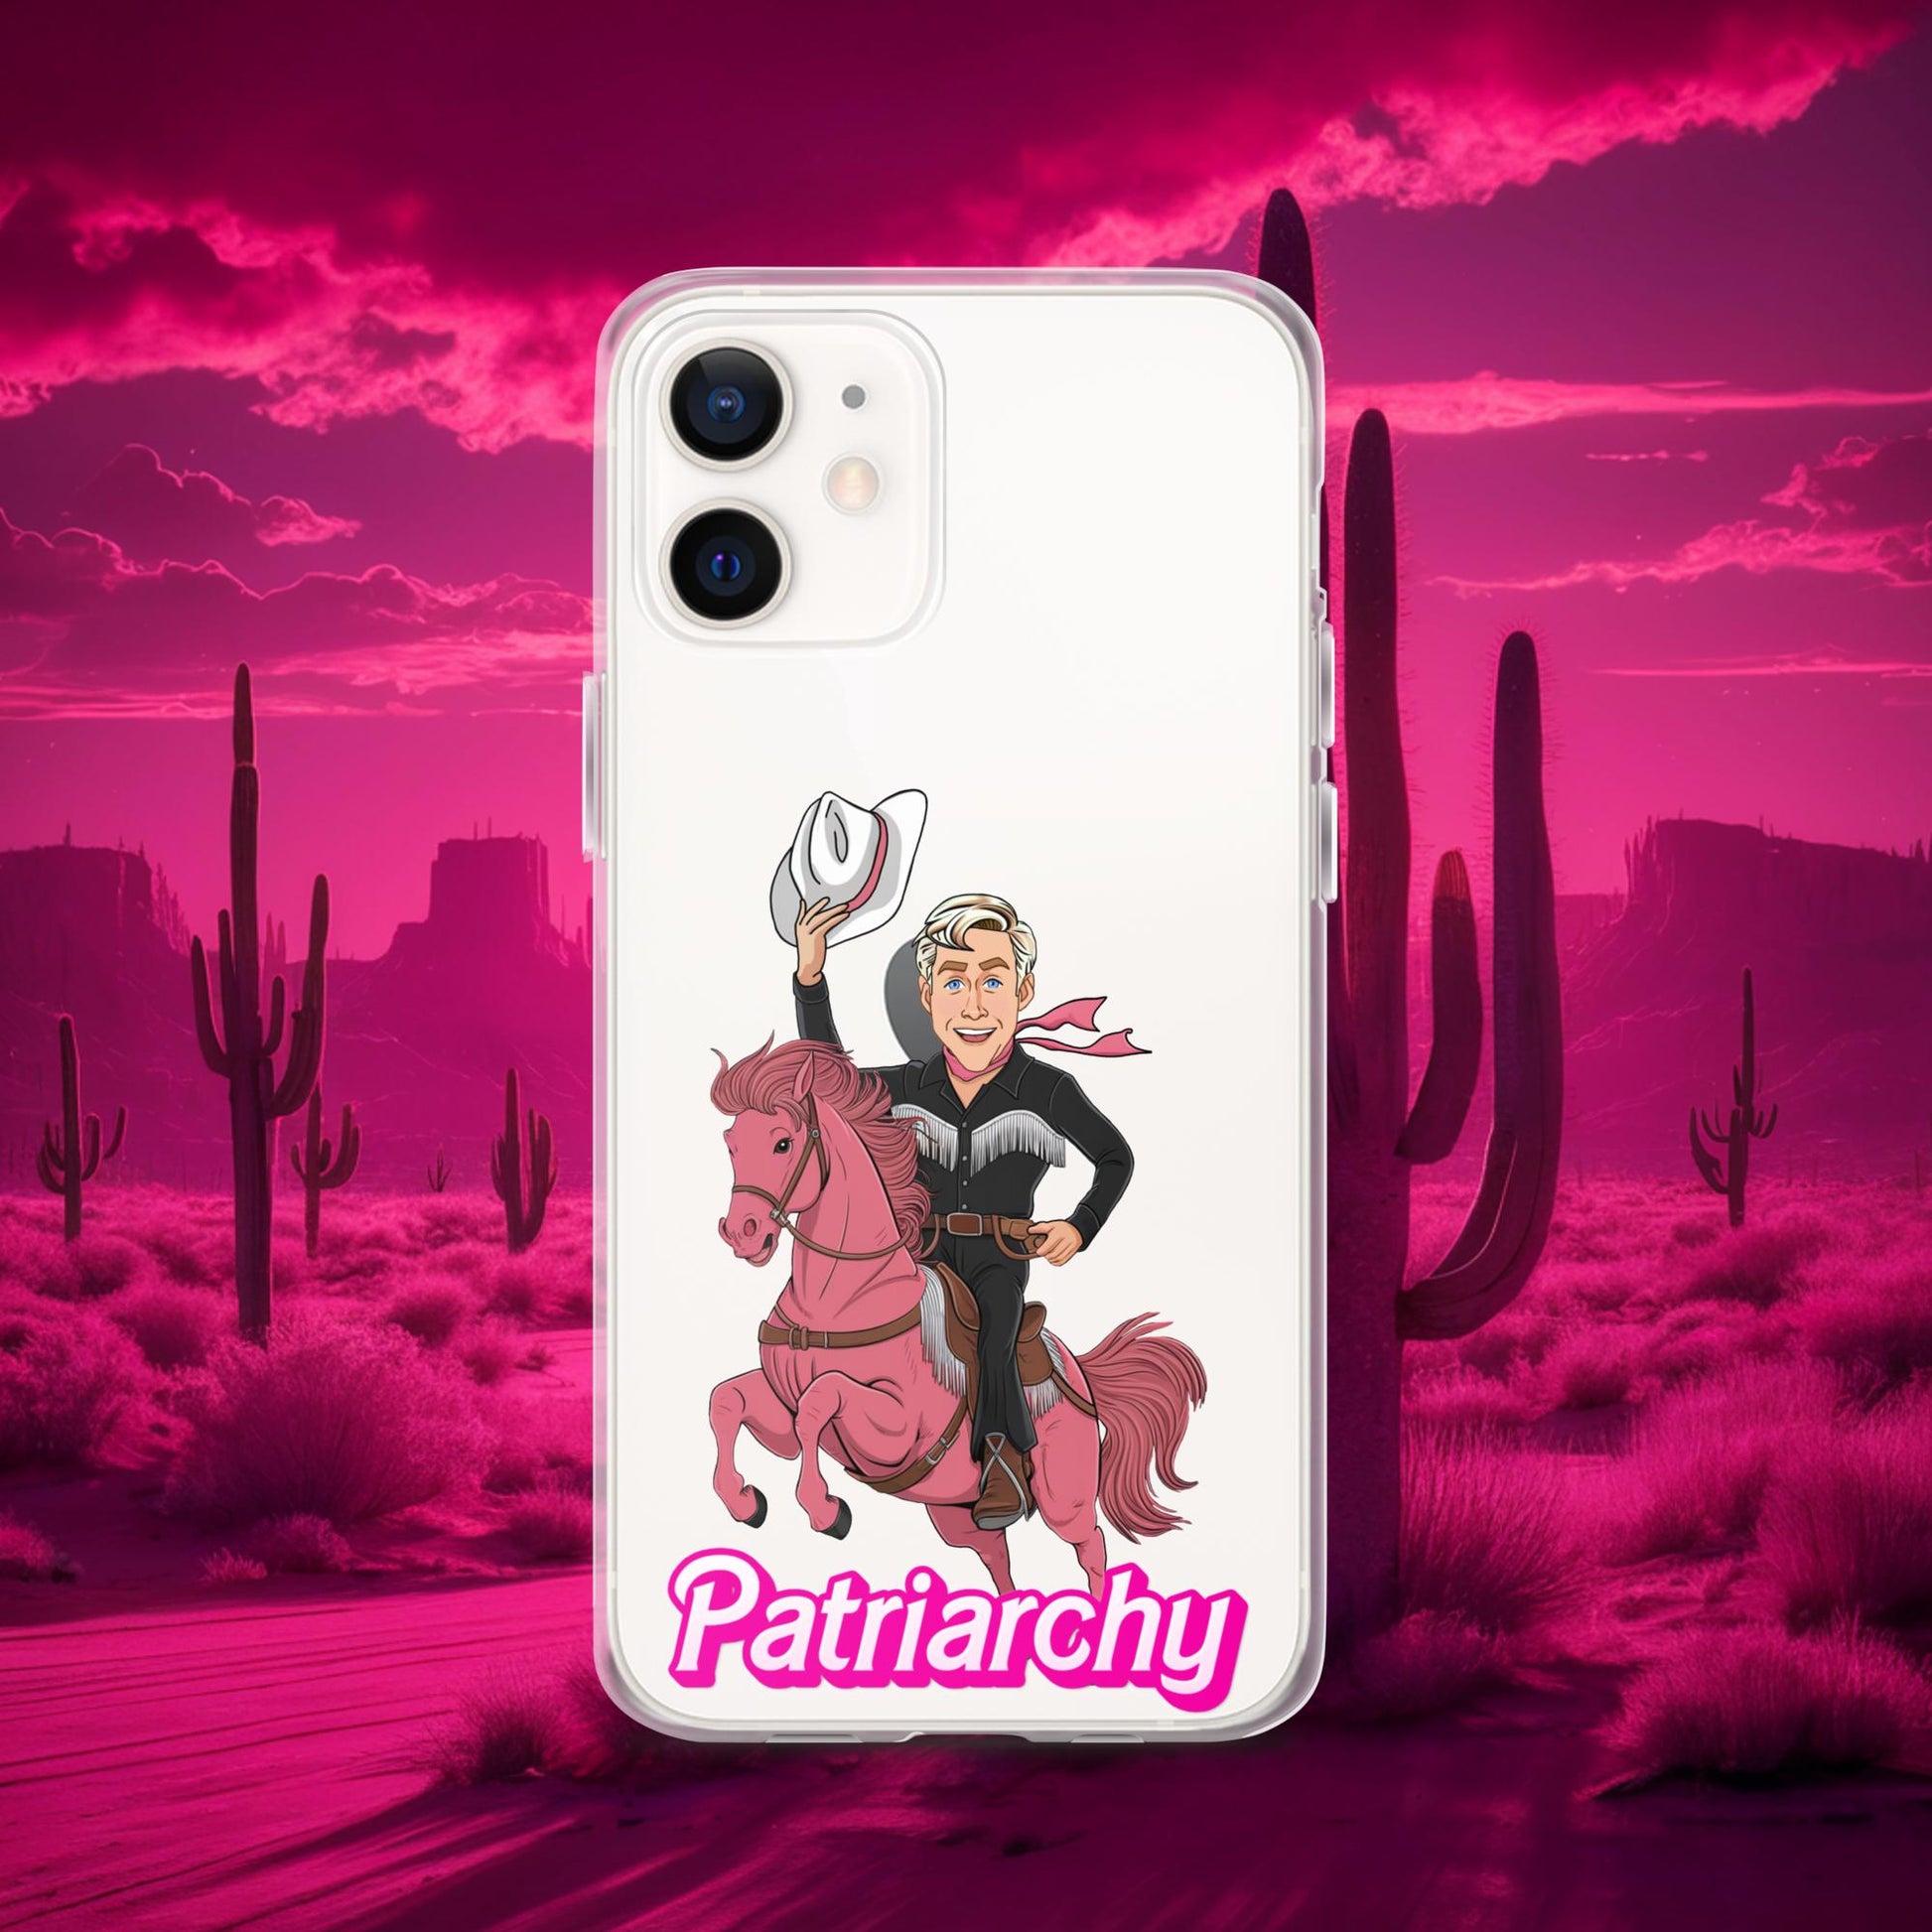 Ken Barbie Movie When I found out the patriarchy wasn't just about horses, I lost interest Clear Case for iPhone Next Cult Brand